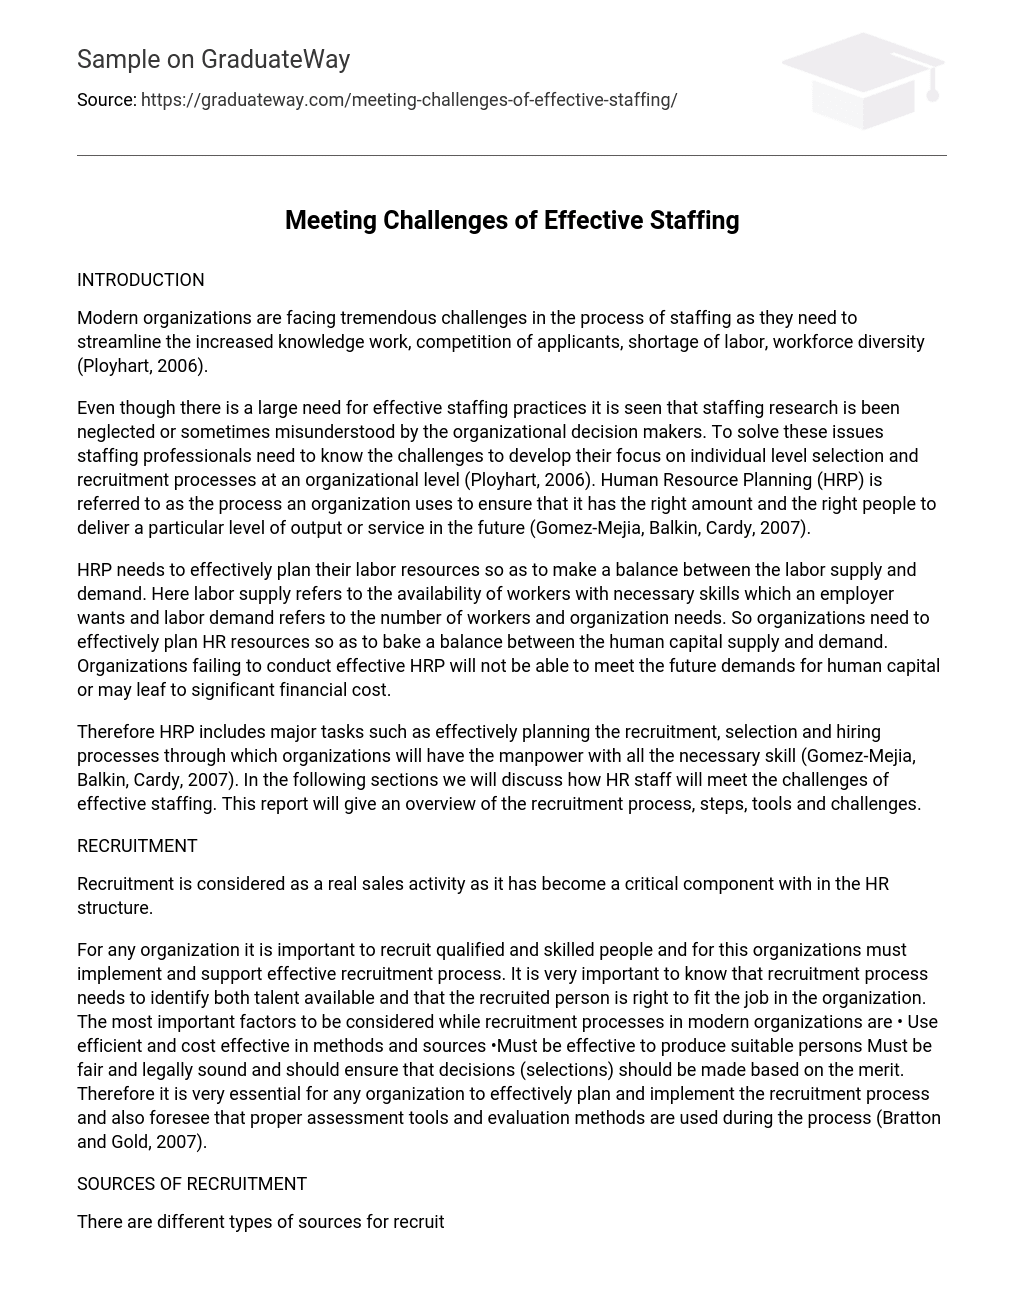 Meeting Challenges of Effective Staffing